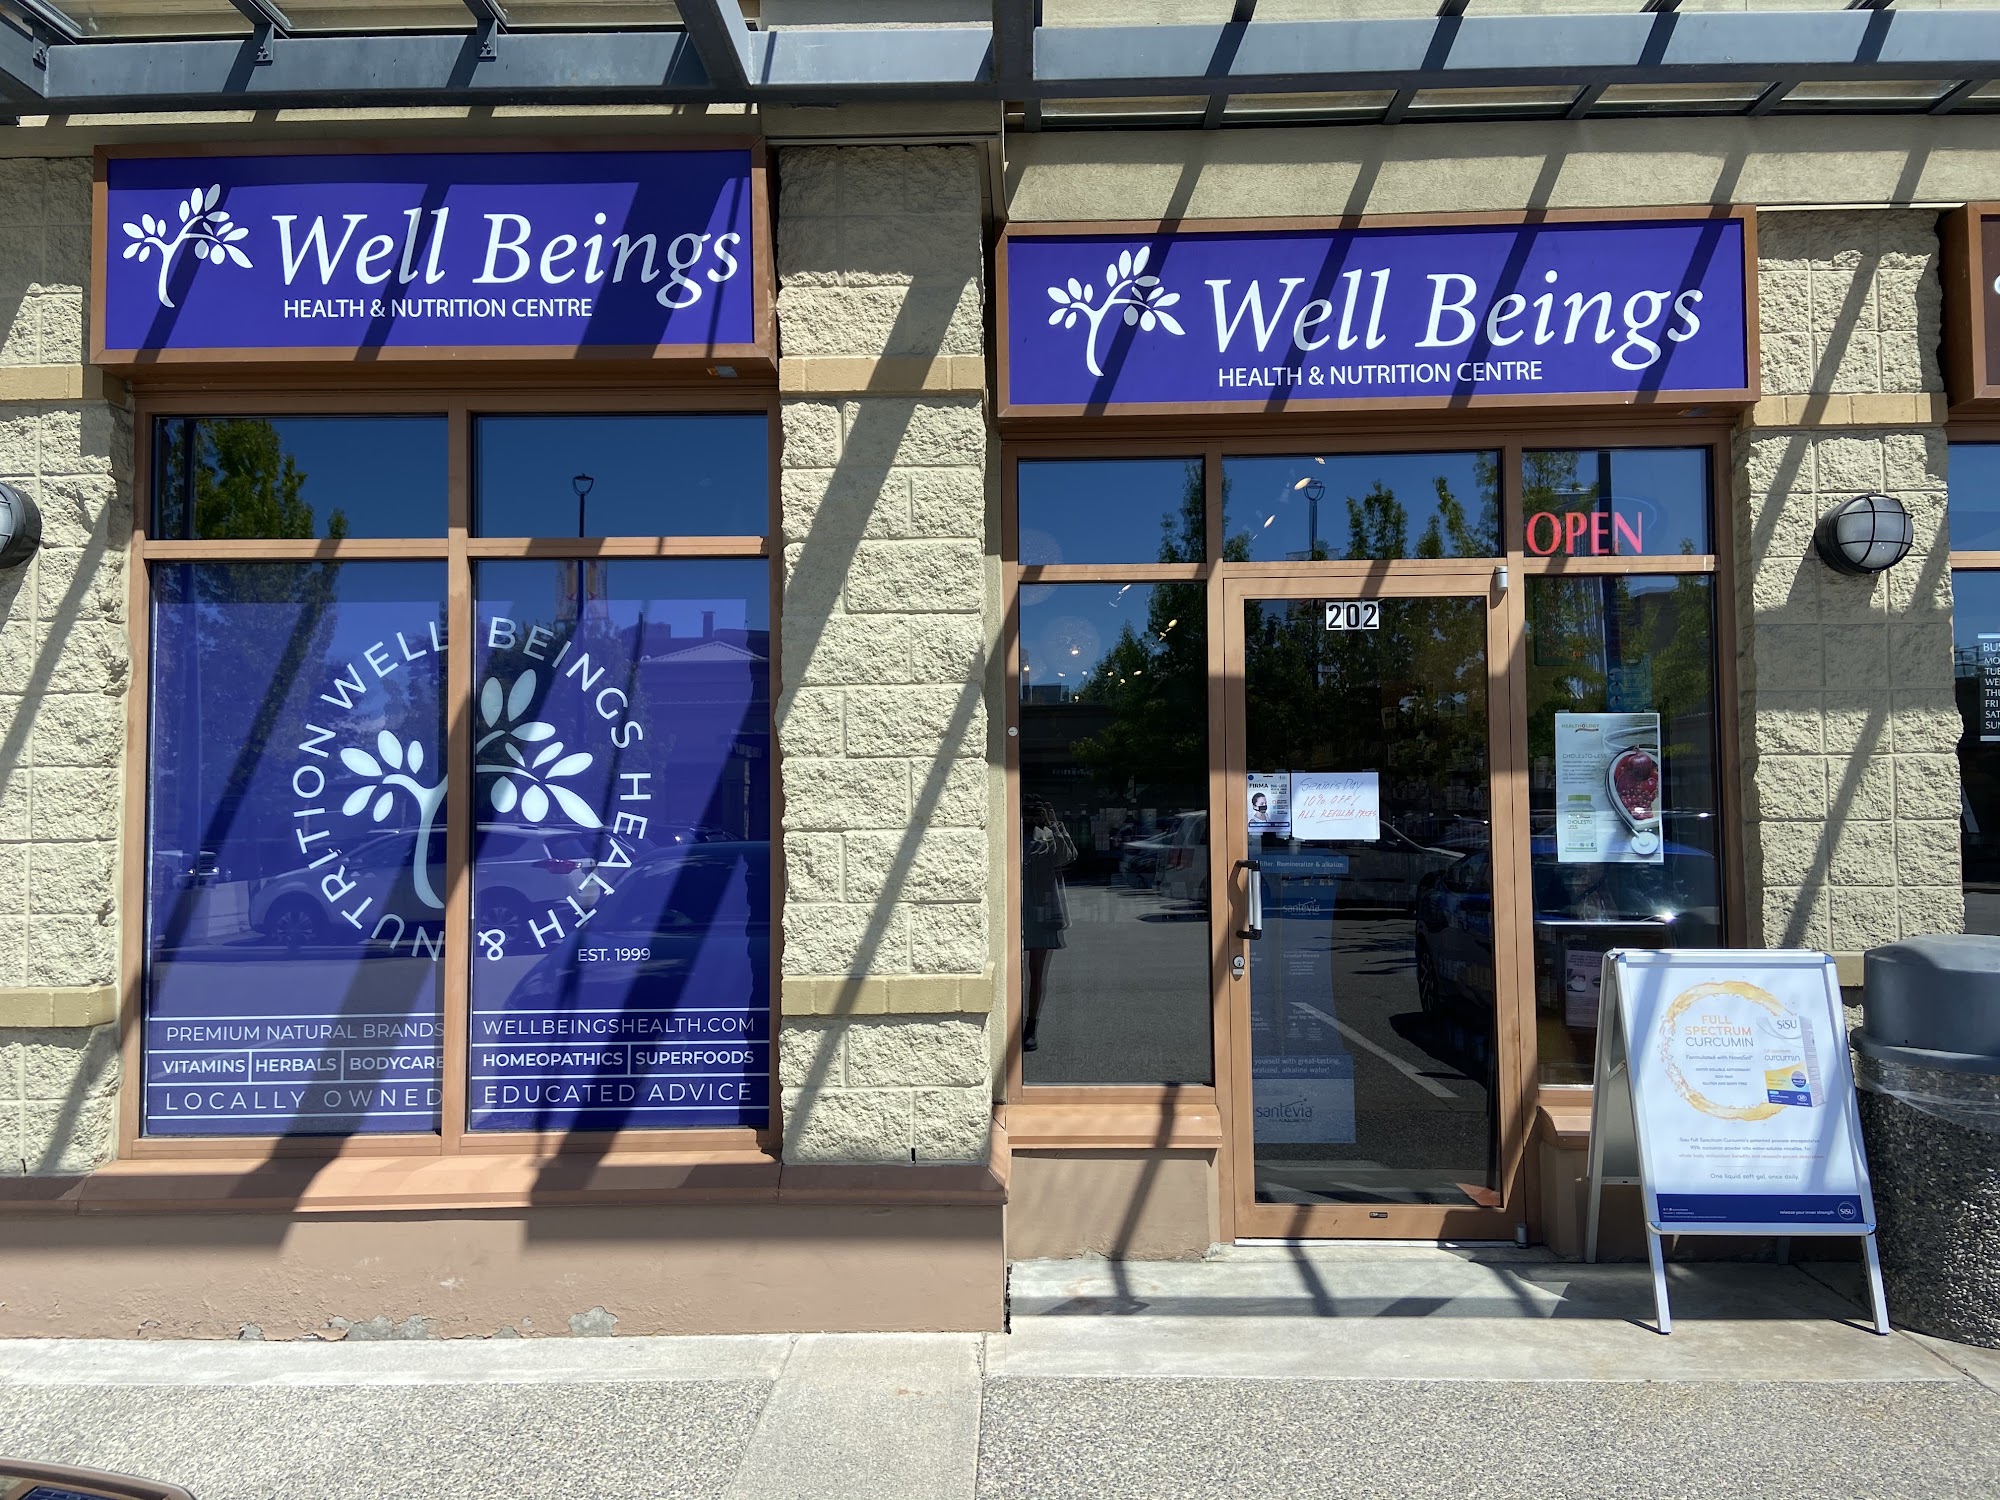 Well Beings Health & Nutrition Centre